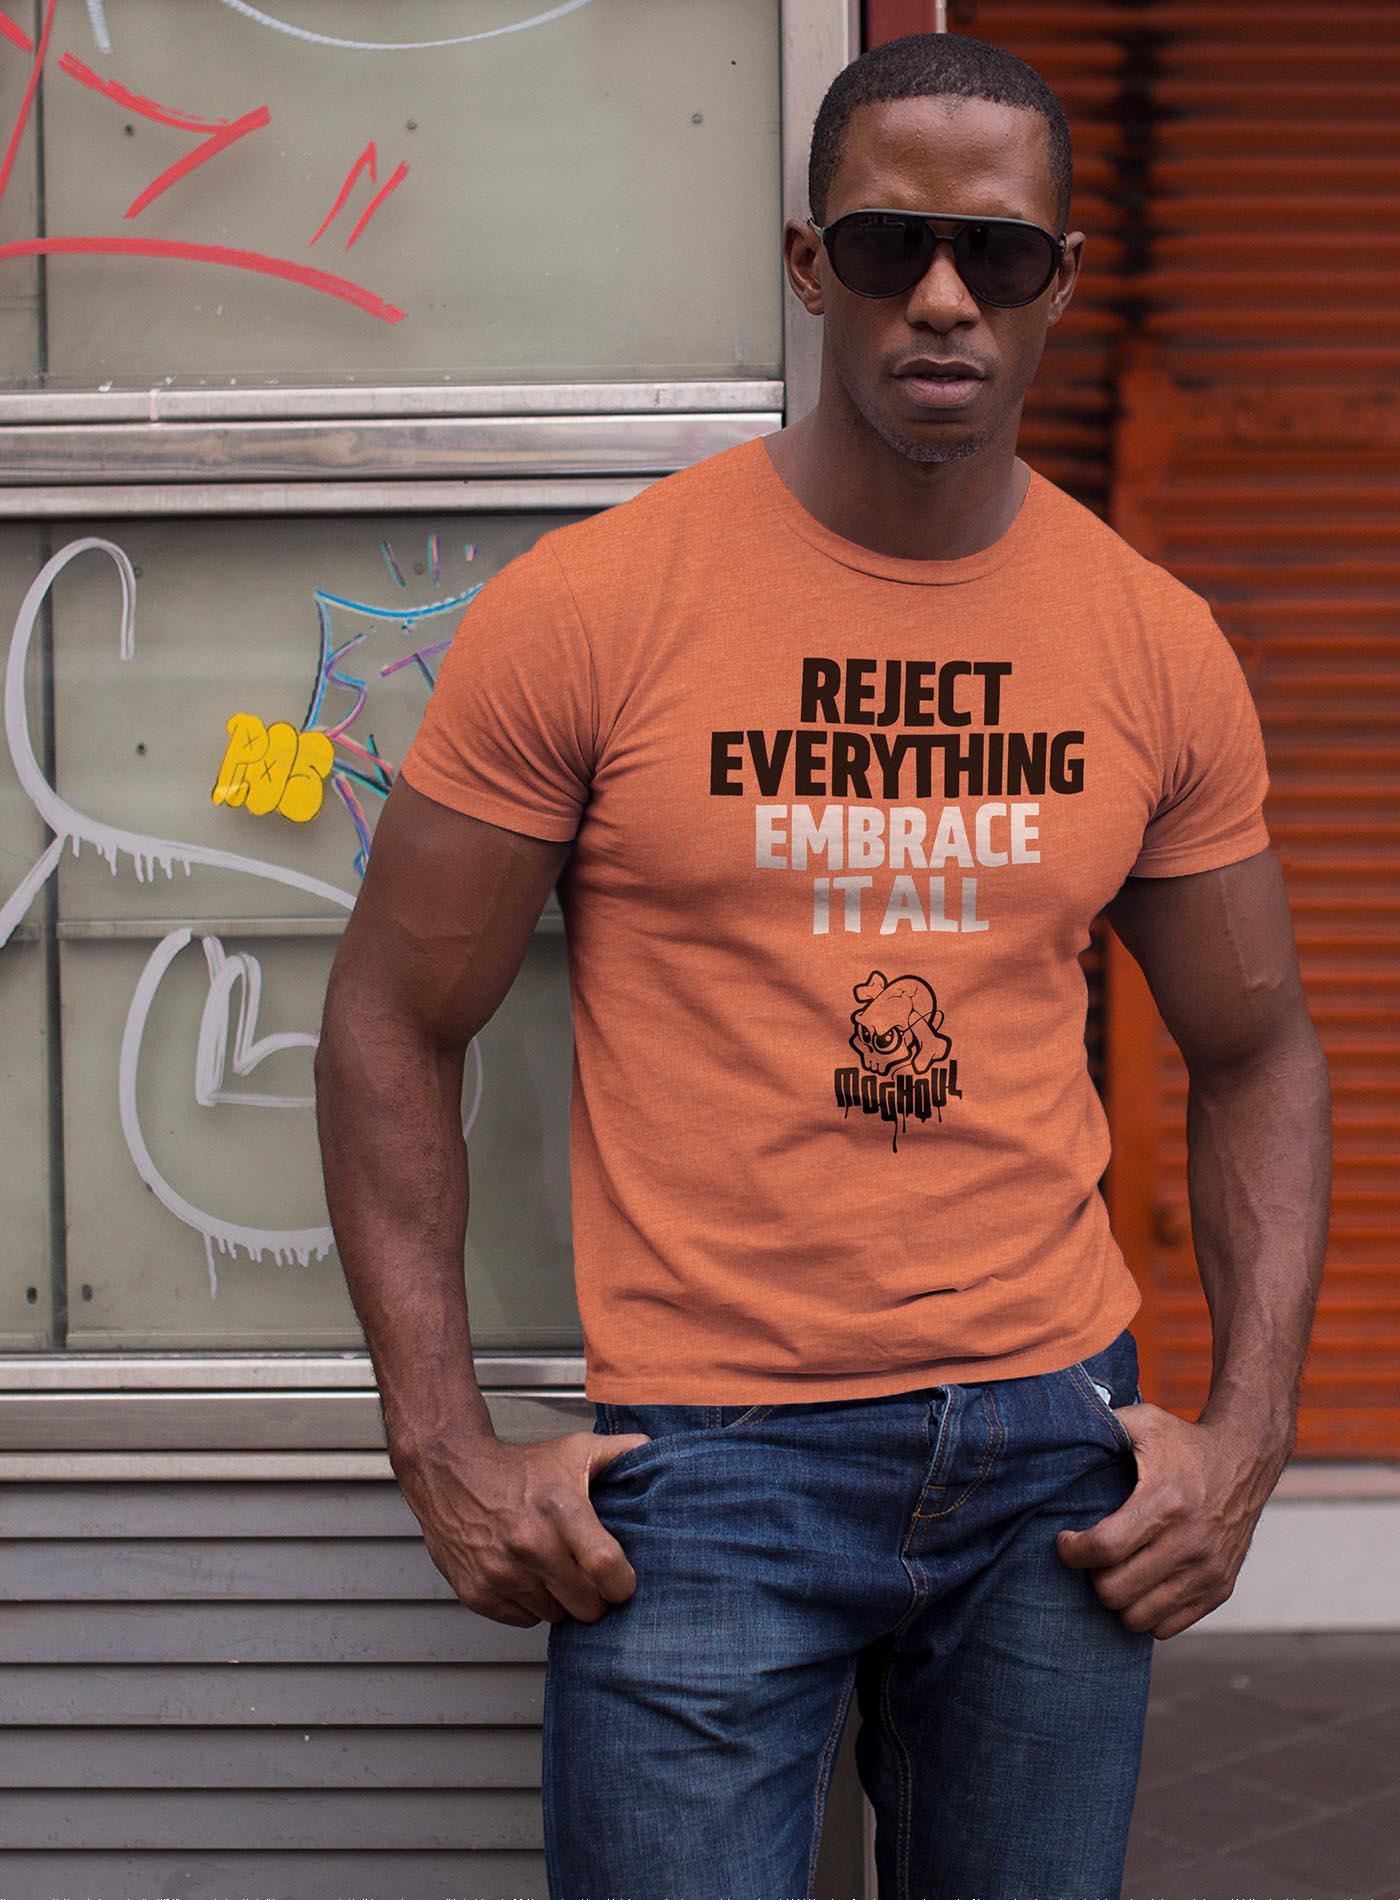 Female modeling an Orange unisex t-shirt featuring the paradoxical phrase "Reject everything, embrace it all" and the moghoul logo.